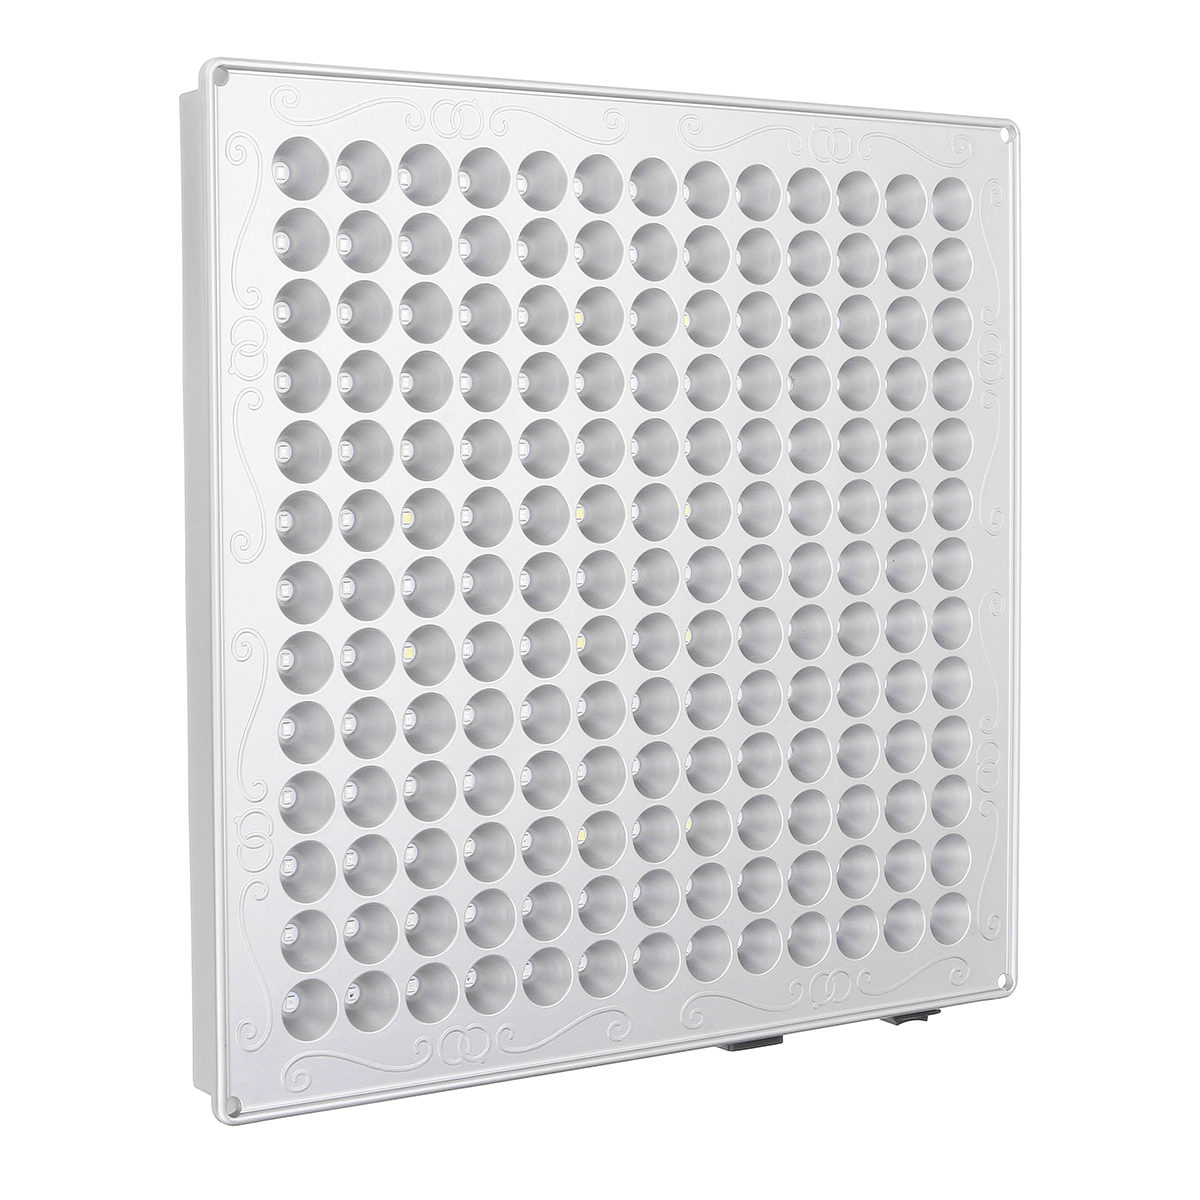 169LED-LED-Grow-Plant-Light-Full-Spectrum-Hydroponic-Panel-Lamp-Growing-Indoor-1816512-8